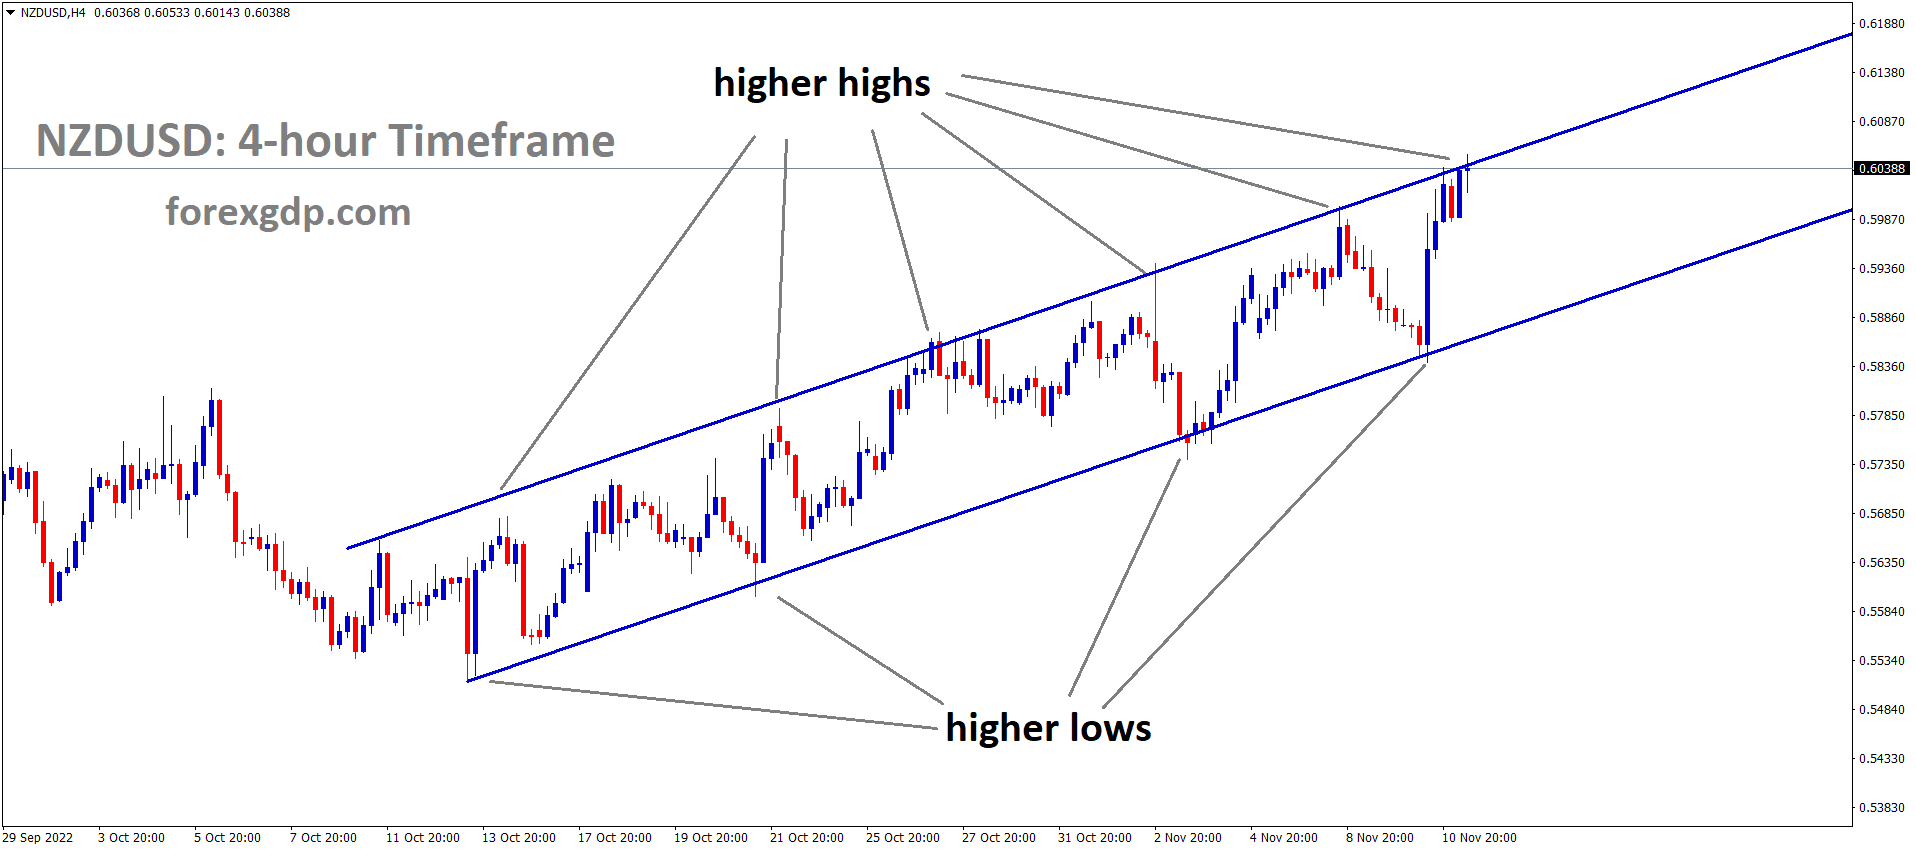 NZDUSD is moving in an Ascending channel and the market has reached the higher high area of the channel 1